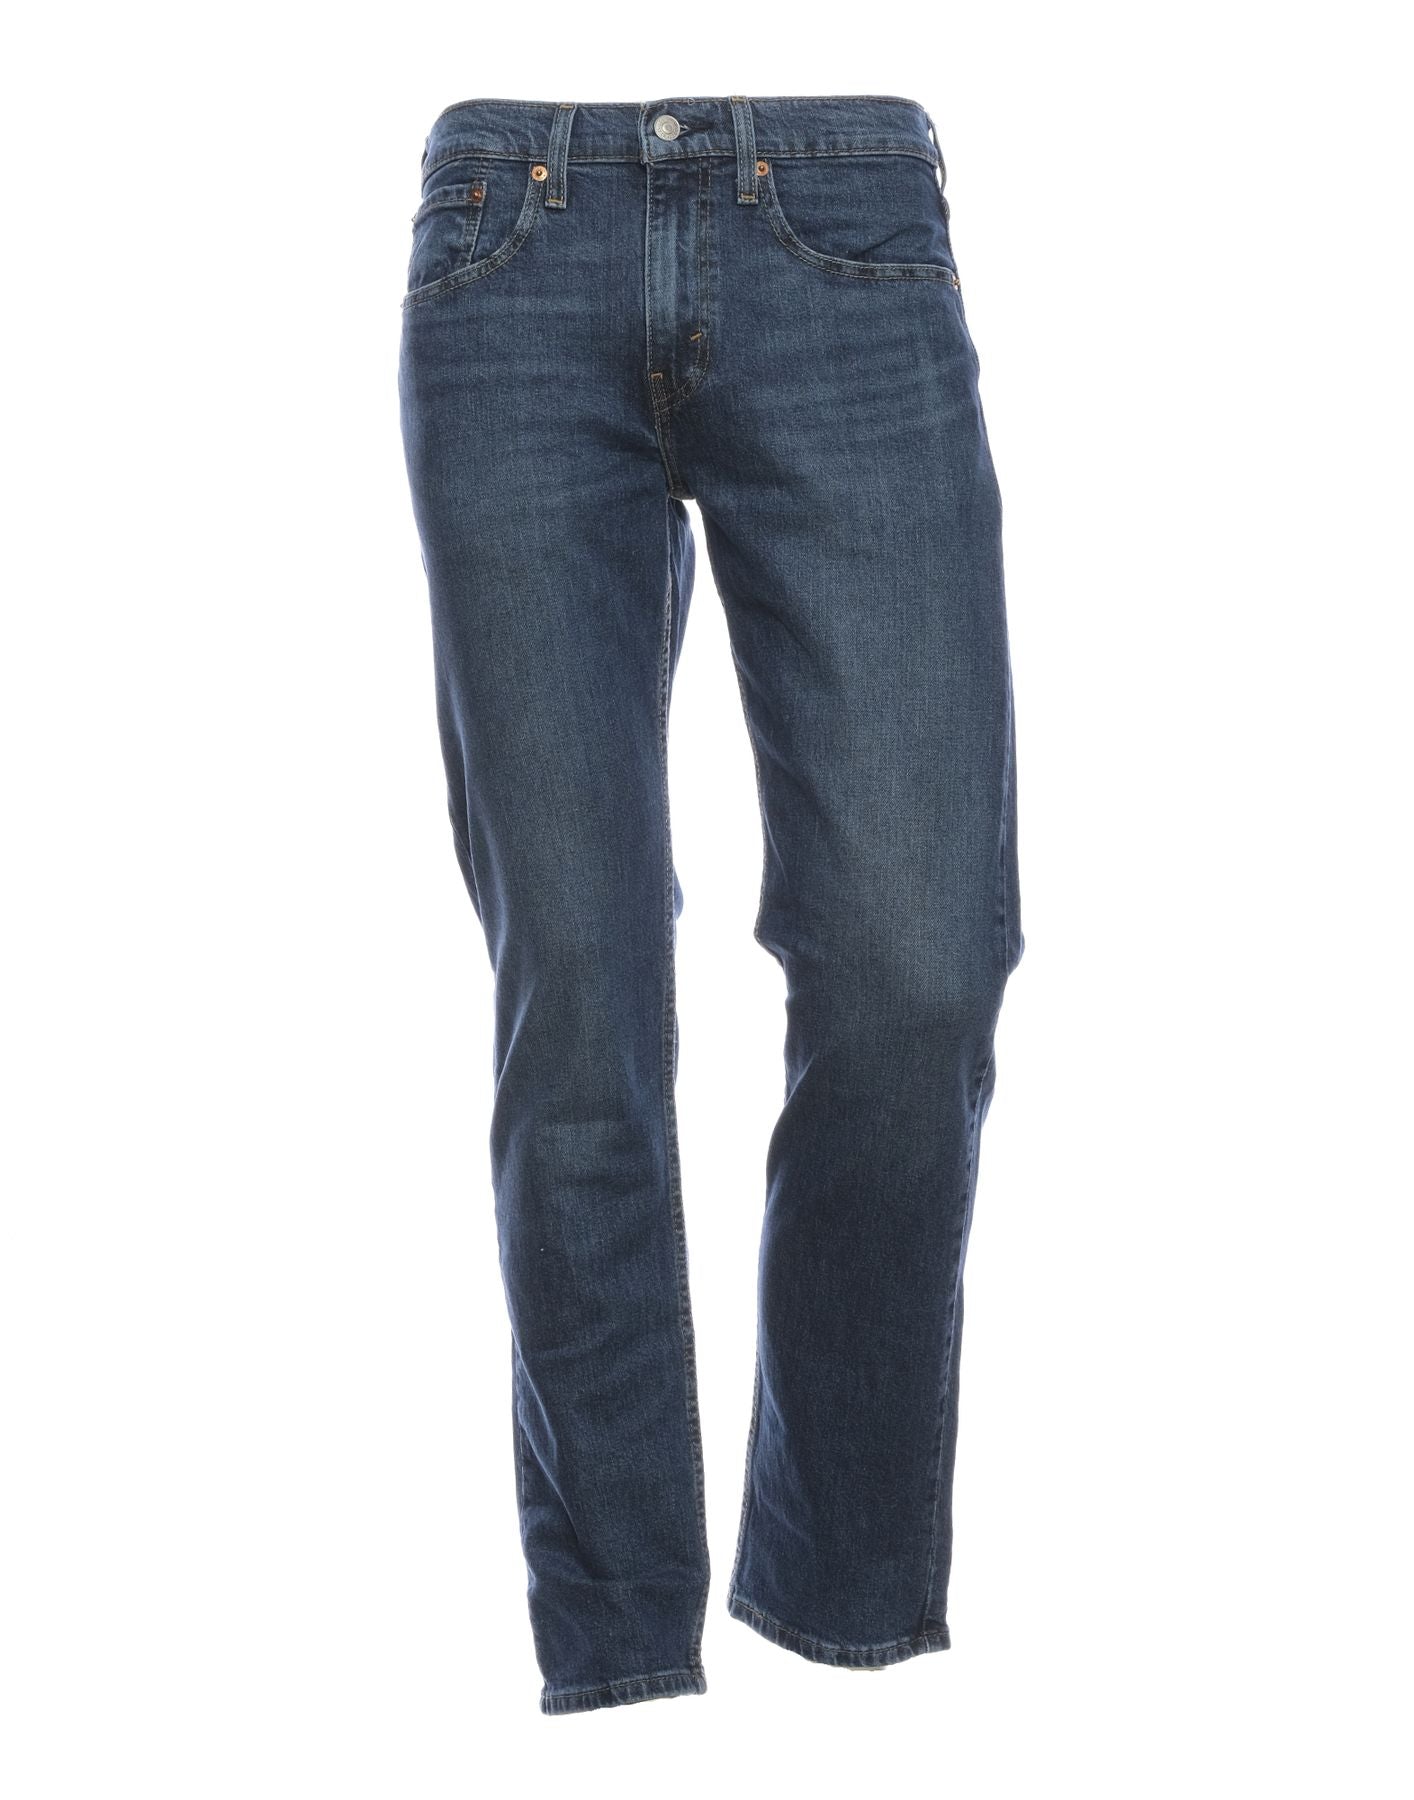 Jeans for man 295071367 Levi's